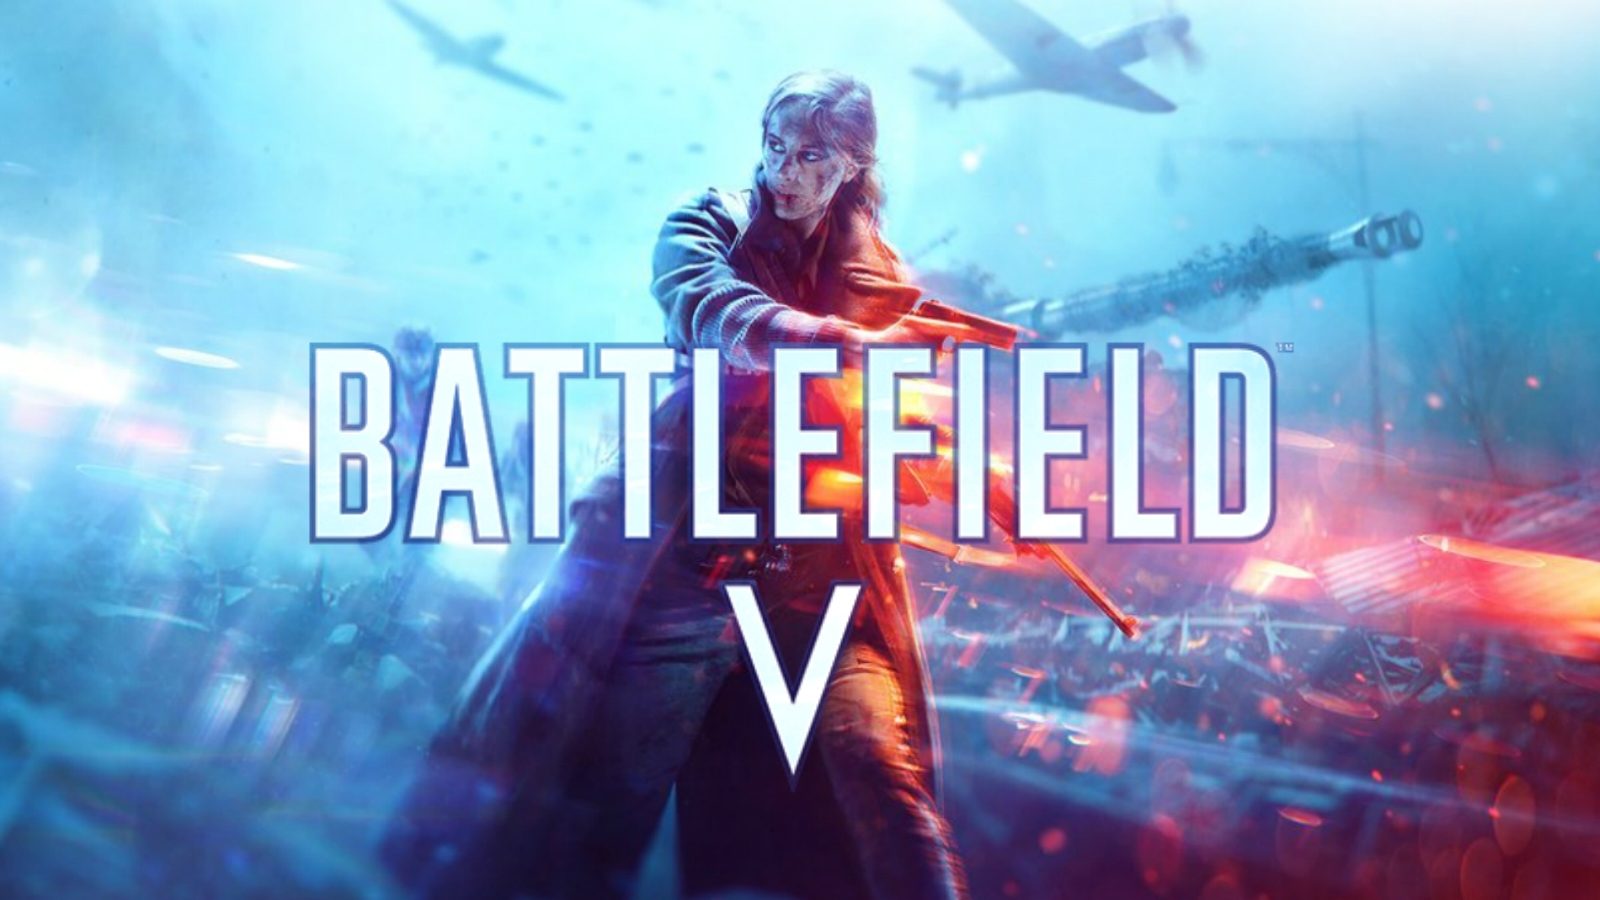 Battlefield V trailer, gameplay, modes and release date